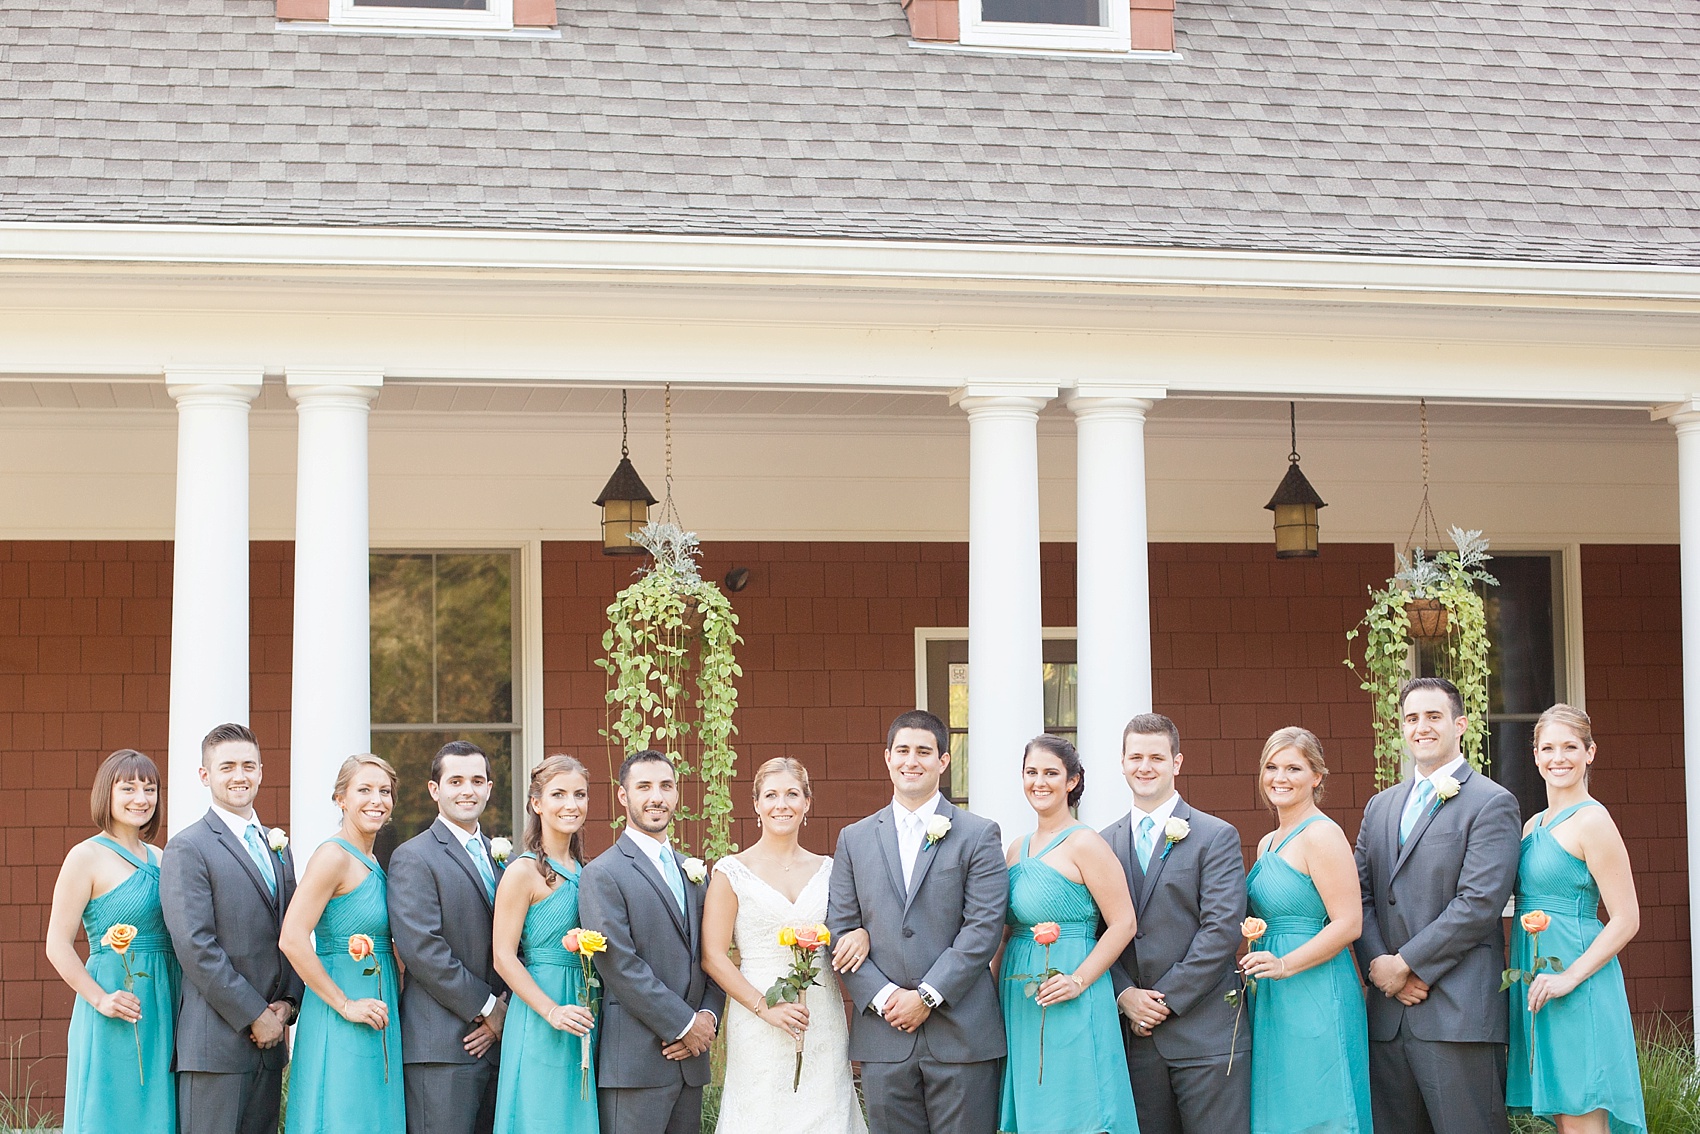 Wedding party in teal dresses and grey suits for a Hollow Brook Golf Club wedding in New York. Photos by Mikkel Paige Photography.